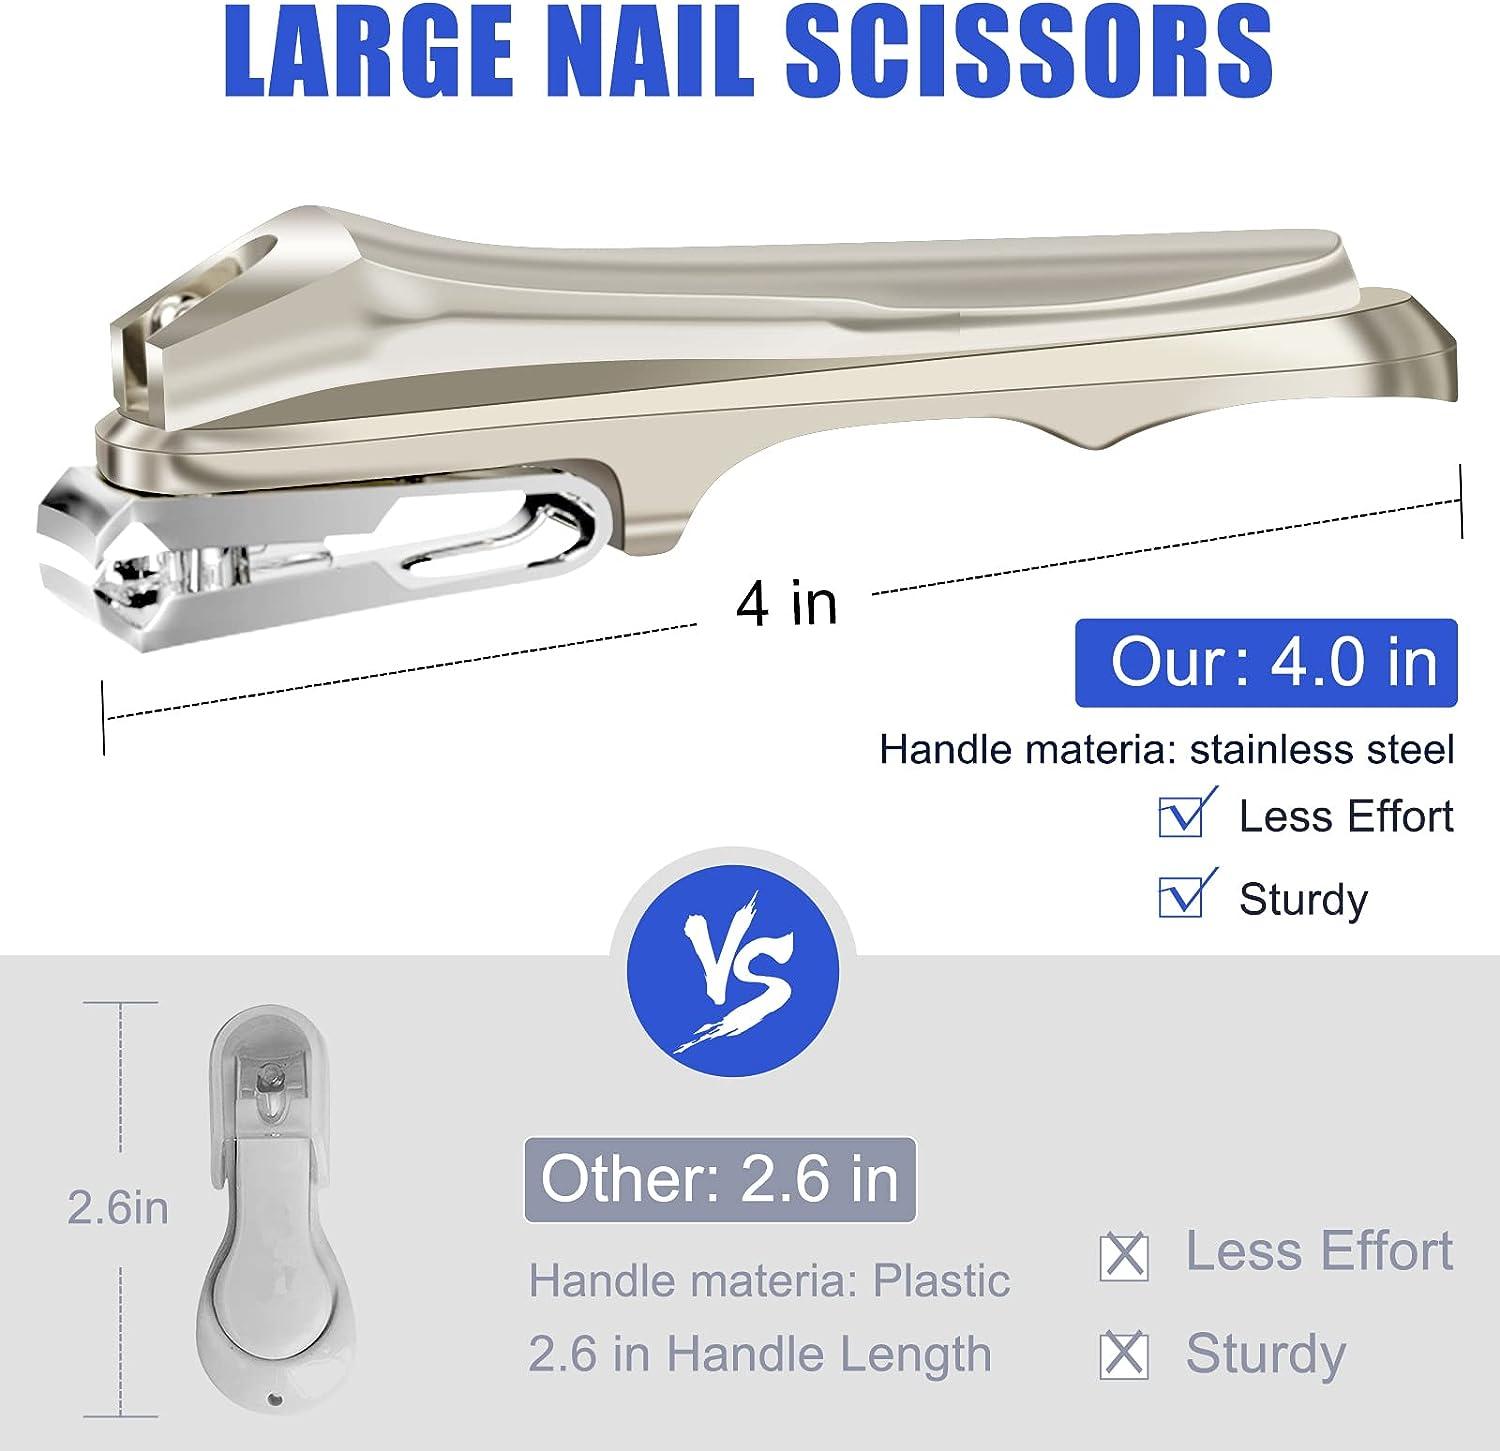 Nail Clippers for Thick Nails - Dr. Mode 15mm Wide Jaw Opening Extra Large Toenail Clippers Cutter with Nail File for Thick Nails, Heavy Duty Fingern